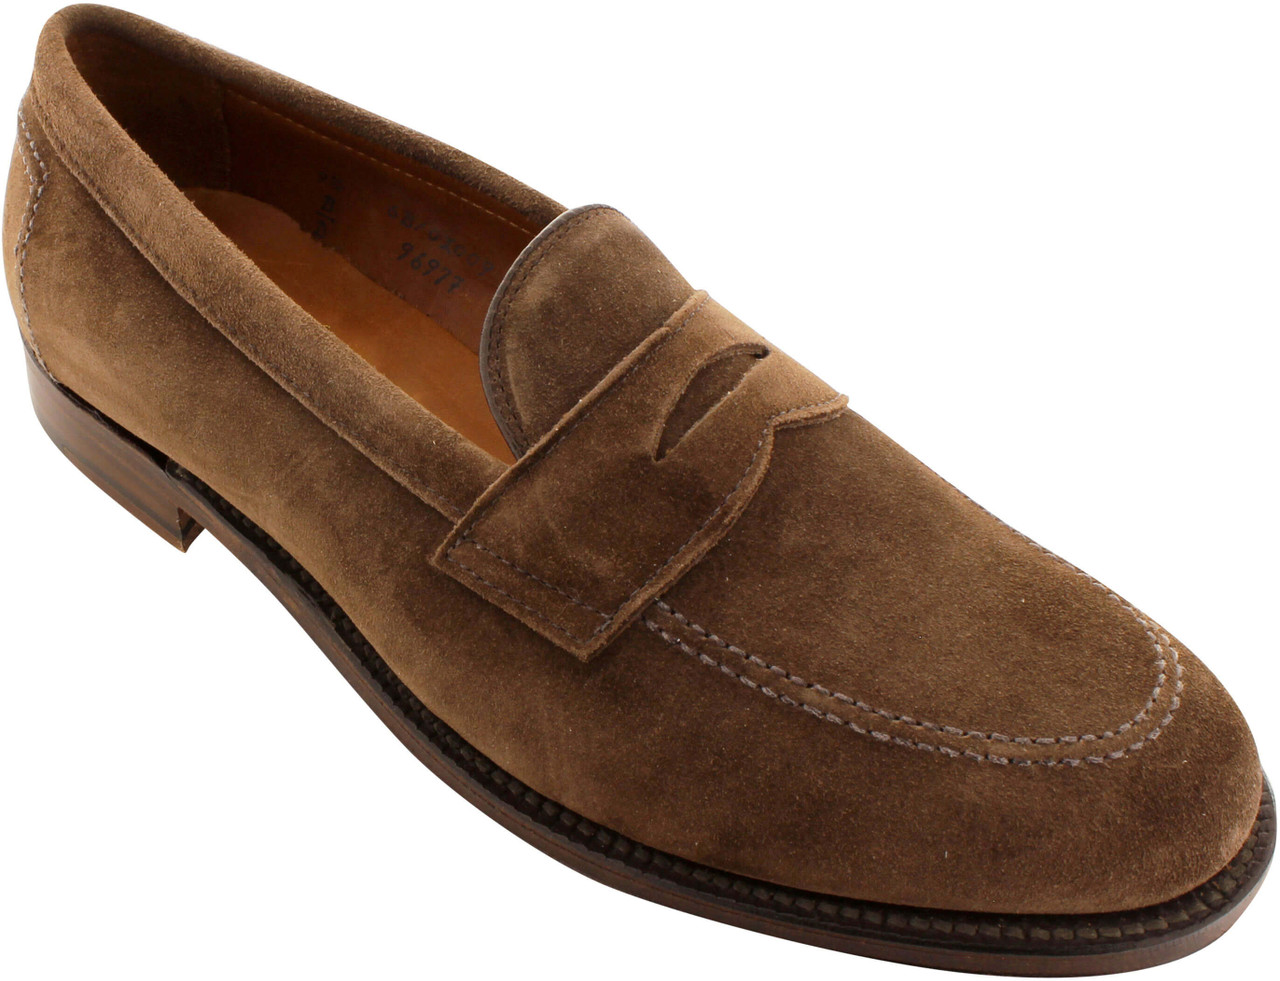 Men's Brown Suede Loafers